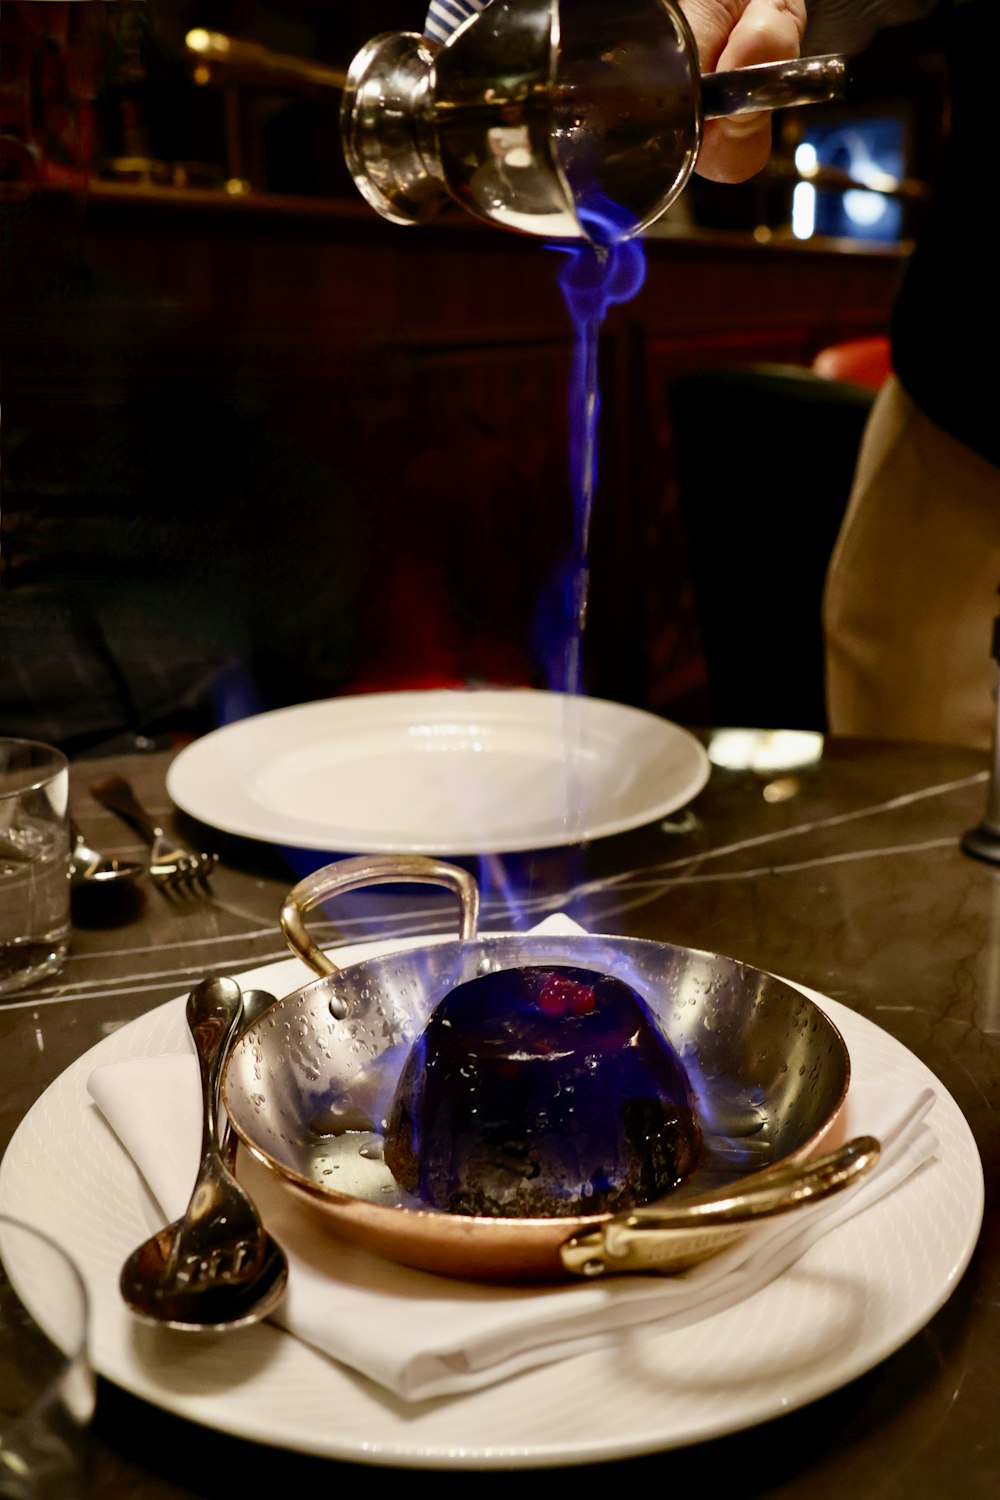 a person pouring blue liquid into a bowl on a plate